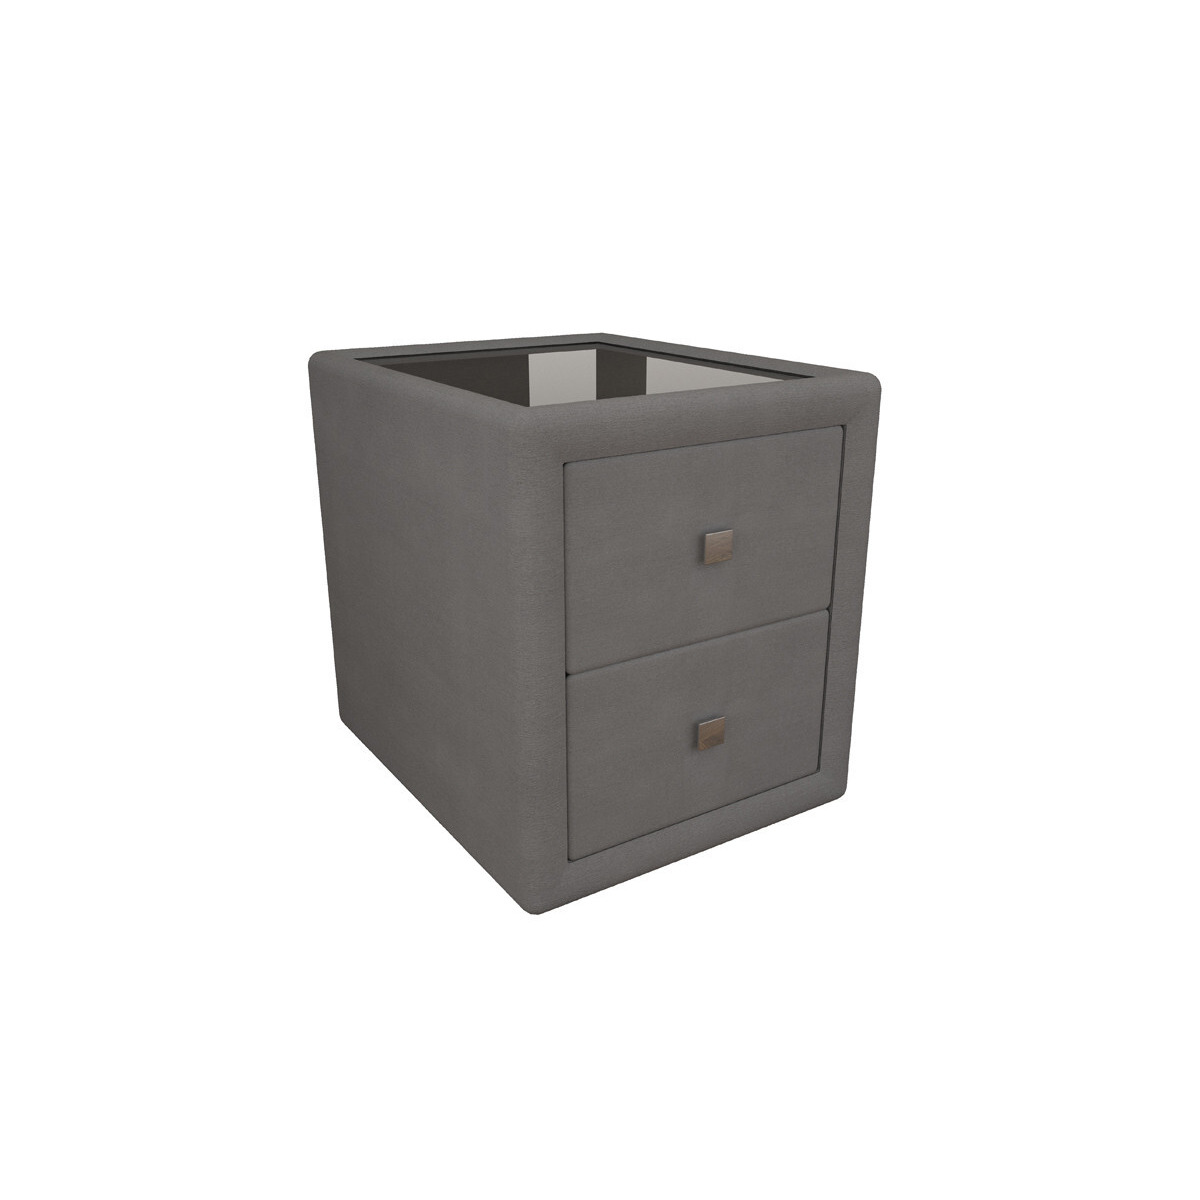 Tech Motion 2 Drawer Bedside Table - image 1